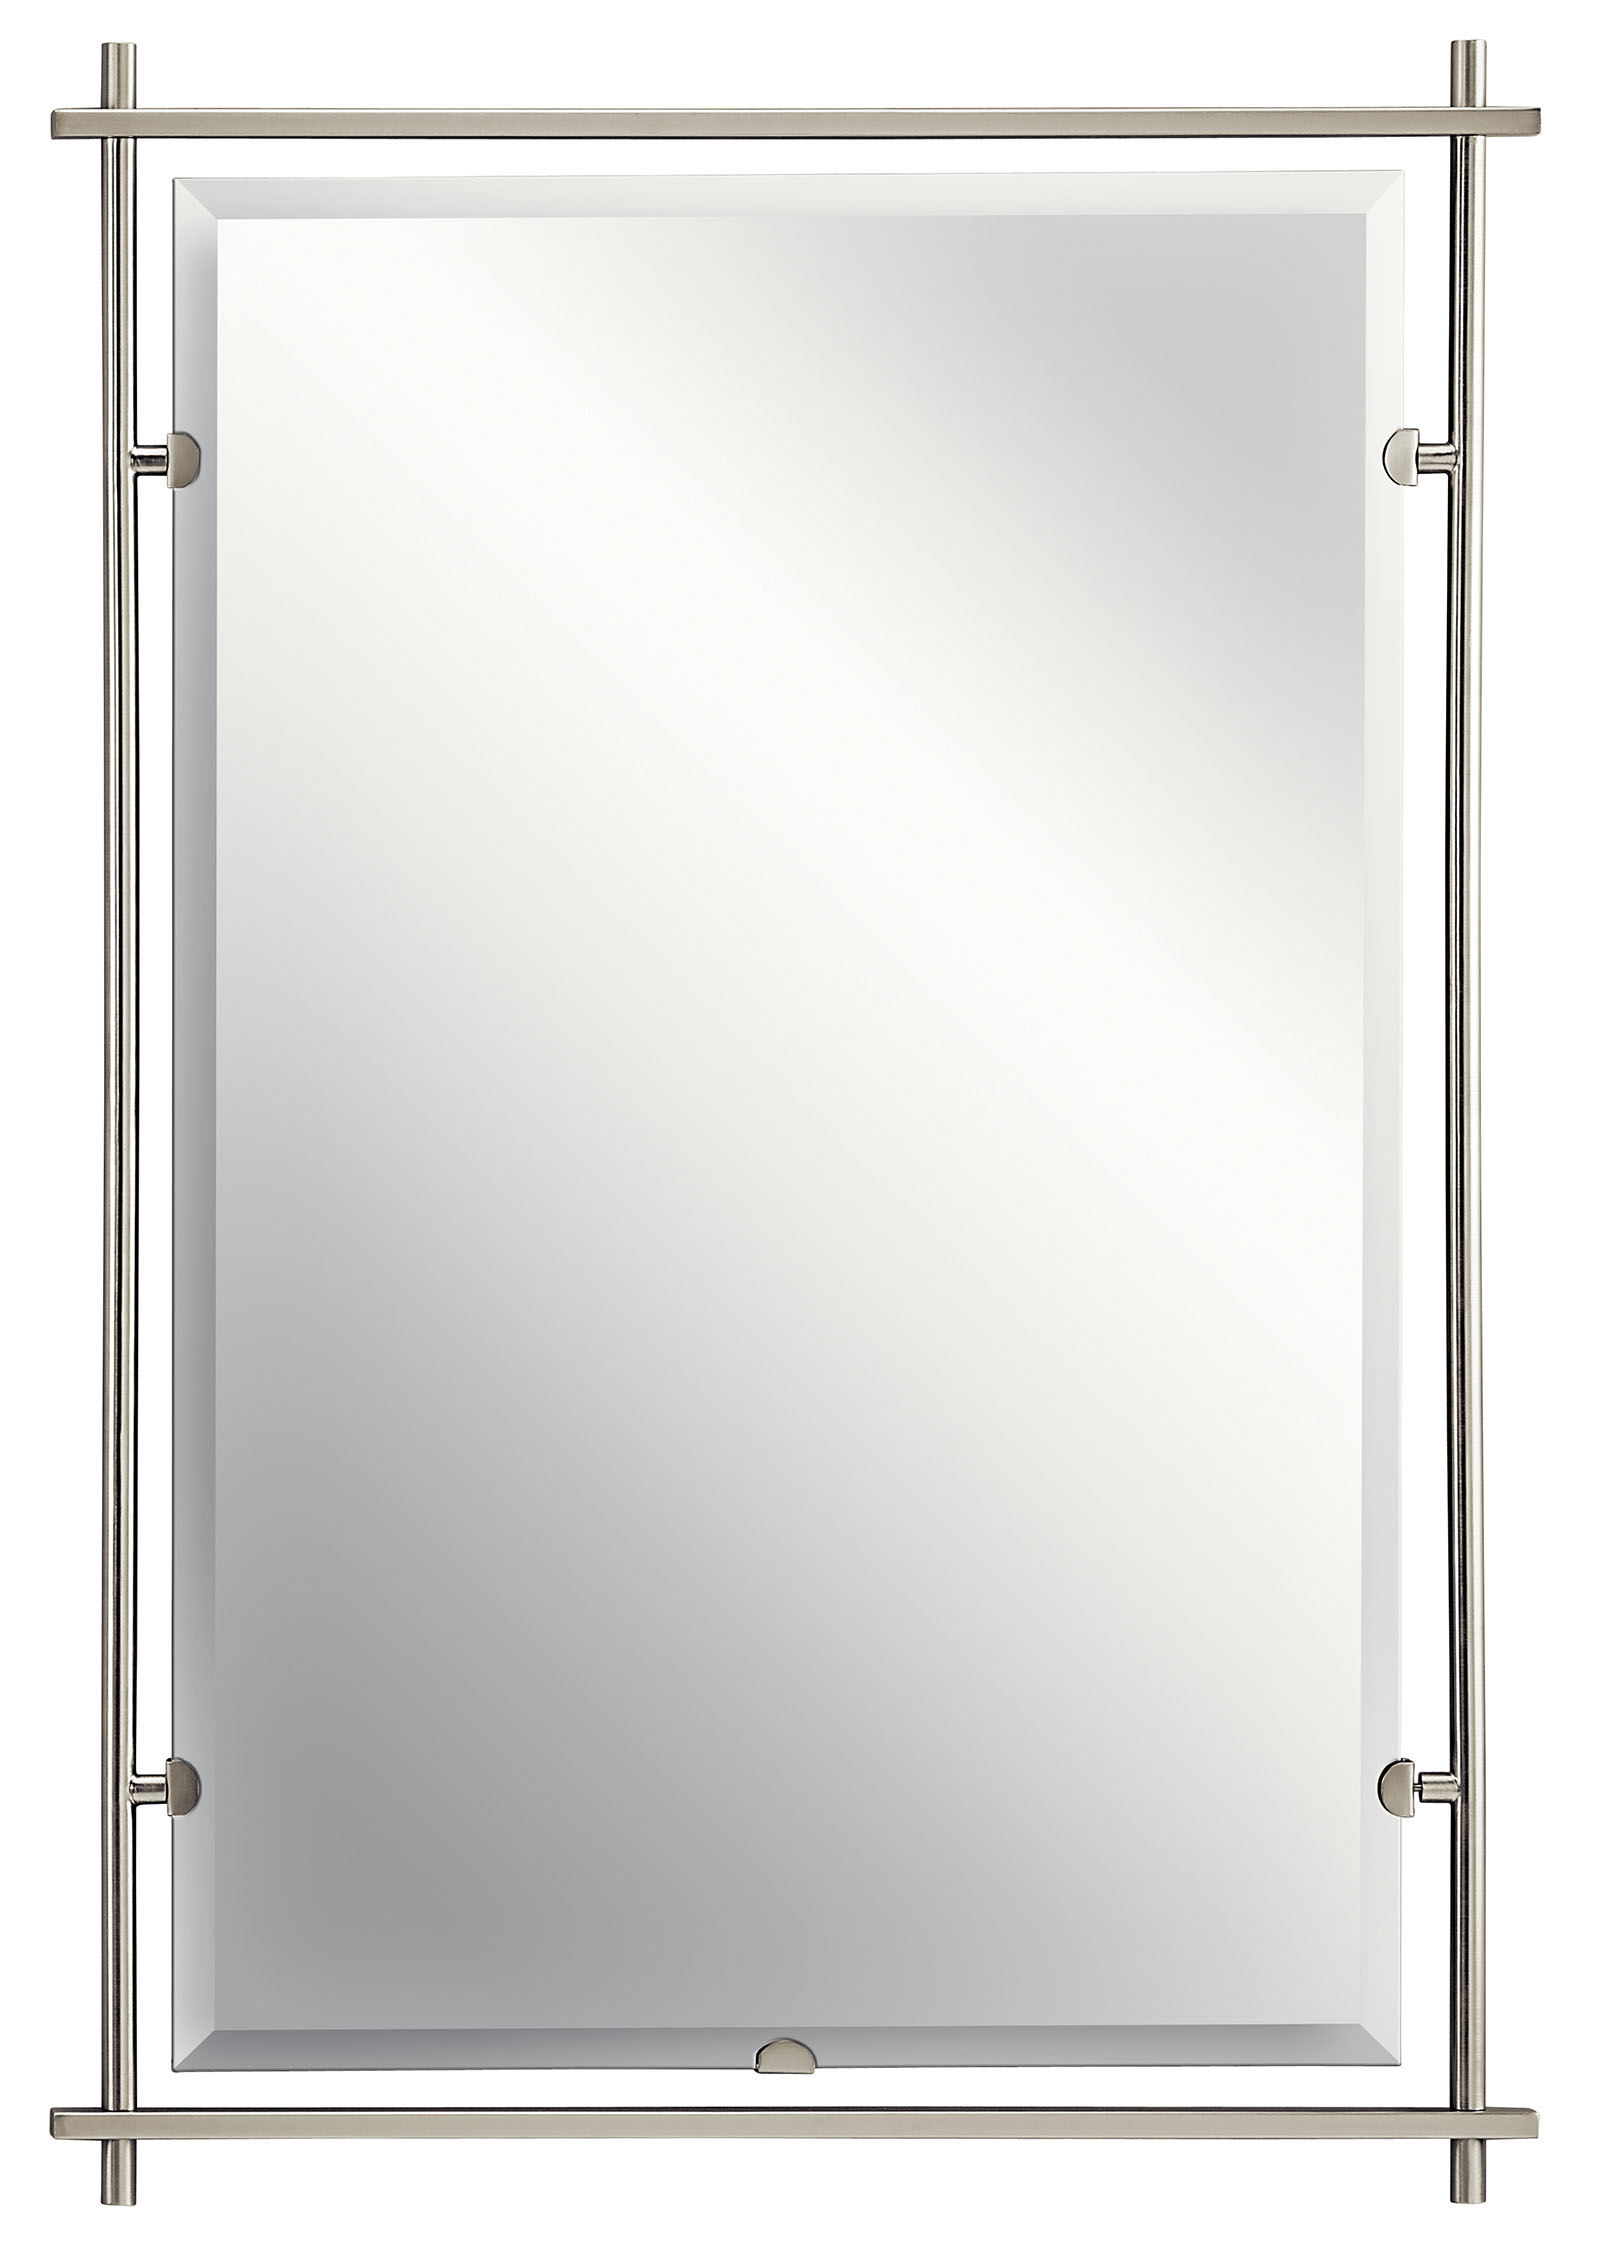 Named after famed furniture designer Eileen Gray, this mirror from the Eileen(TM) Collection features a clean, straight linear construction. The clean, polished elegance of the Brushed Nickel finish is an ideal complement for your home.